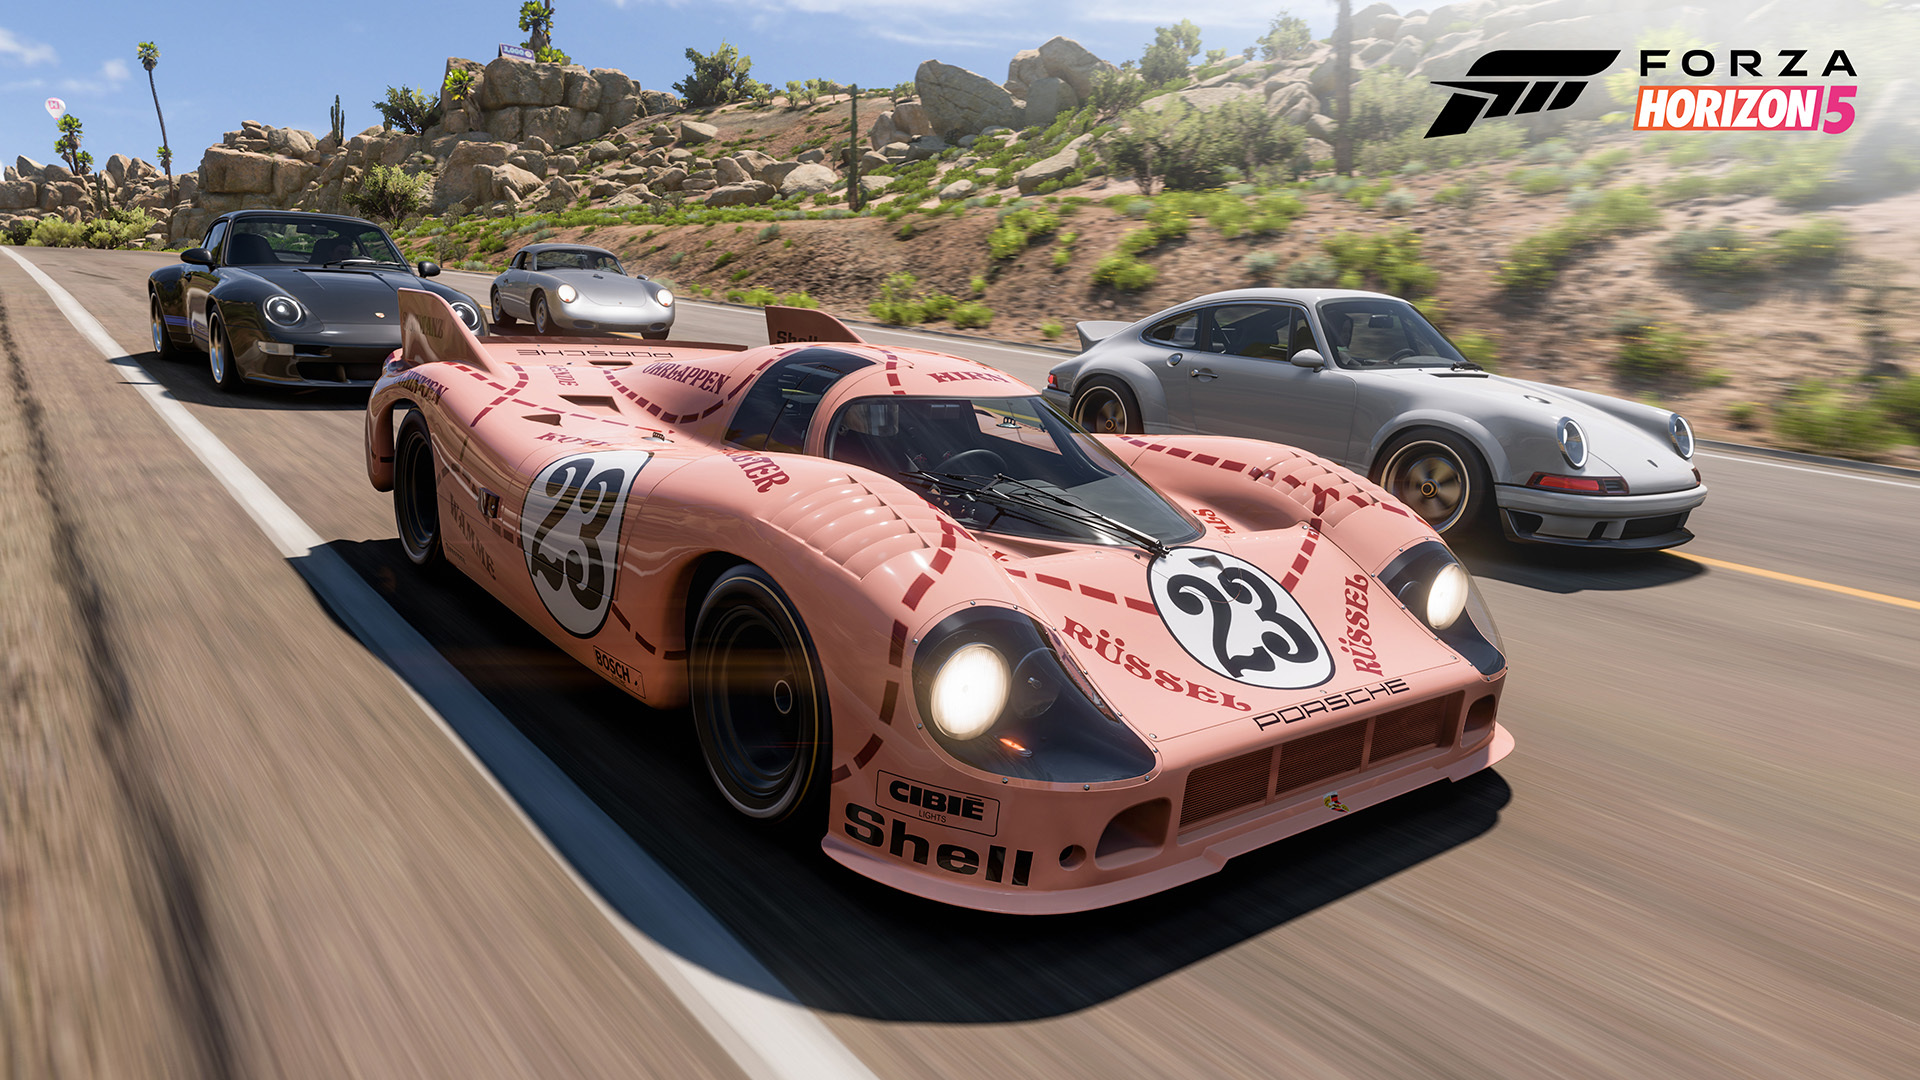 Forza Horizon 5 hotfix targets stability and online multiplayer